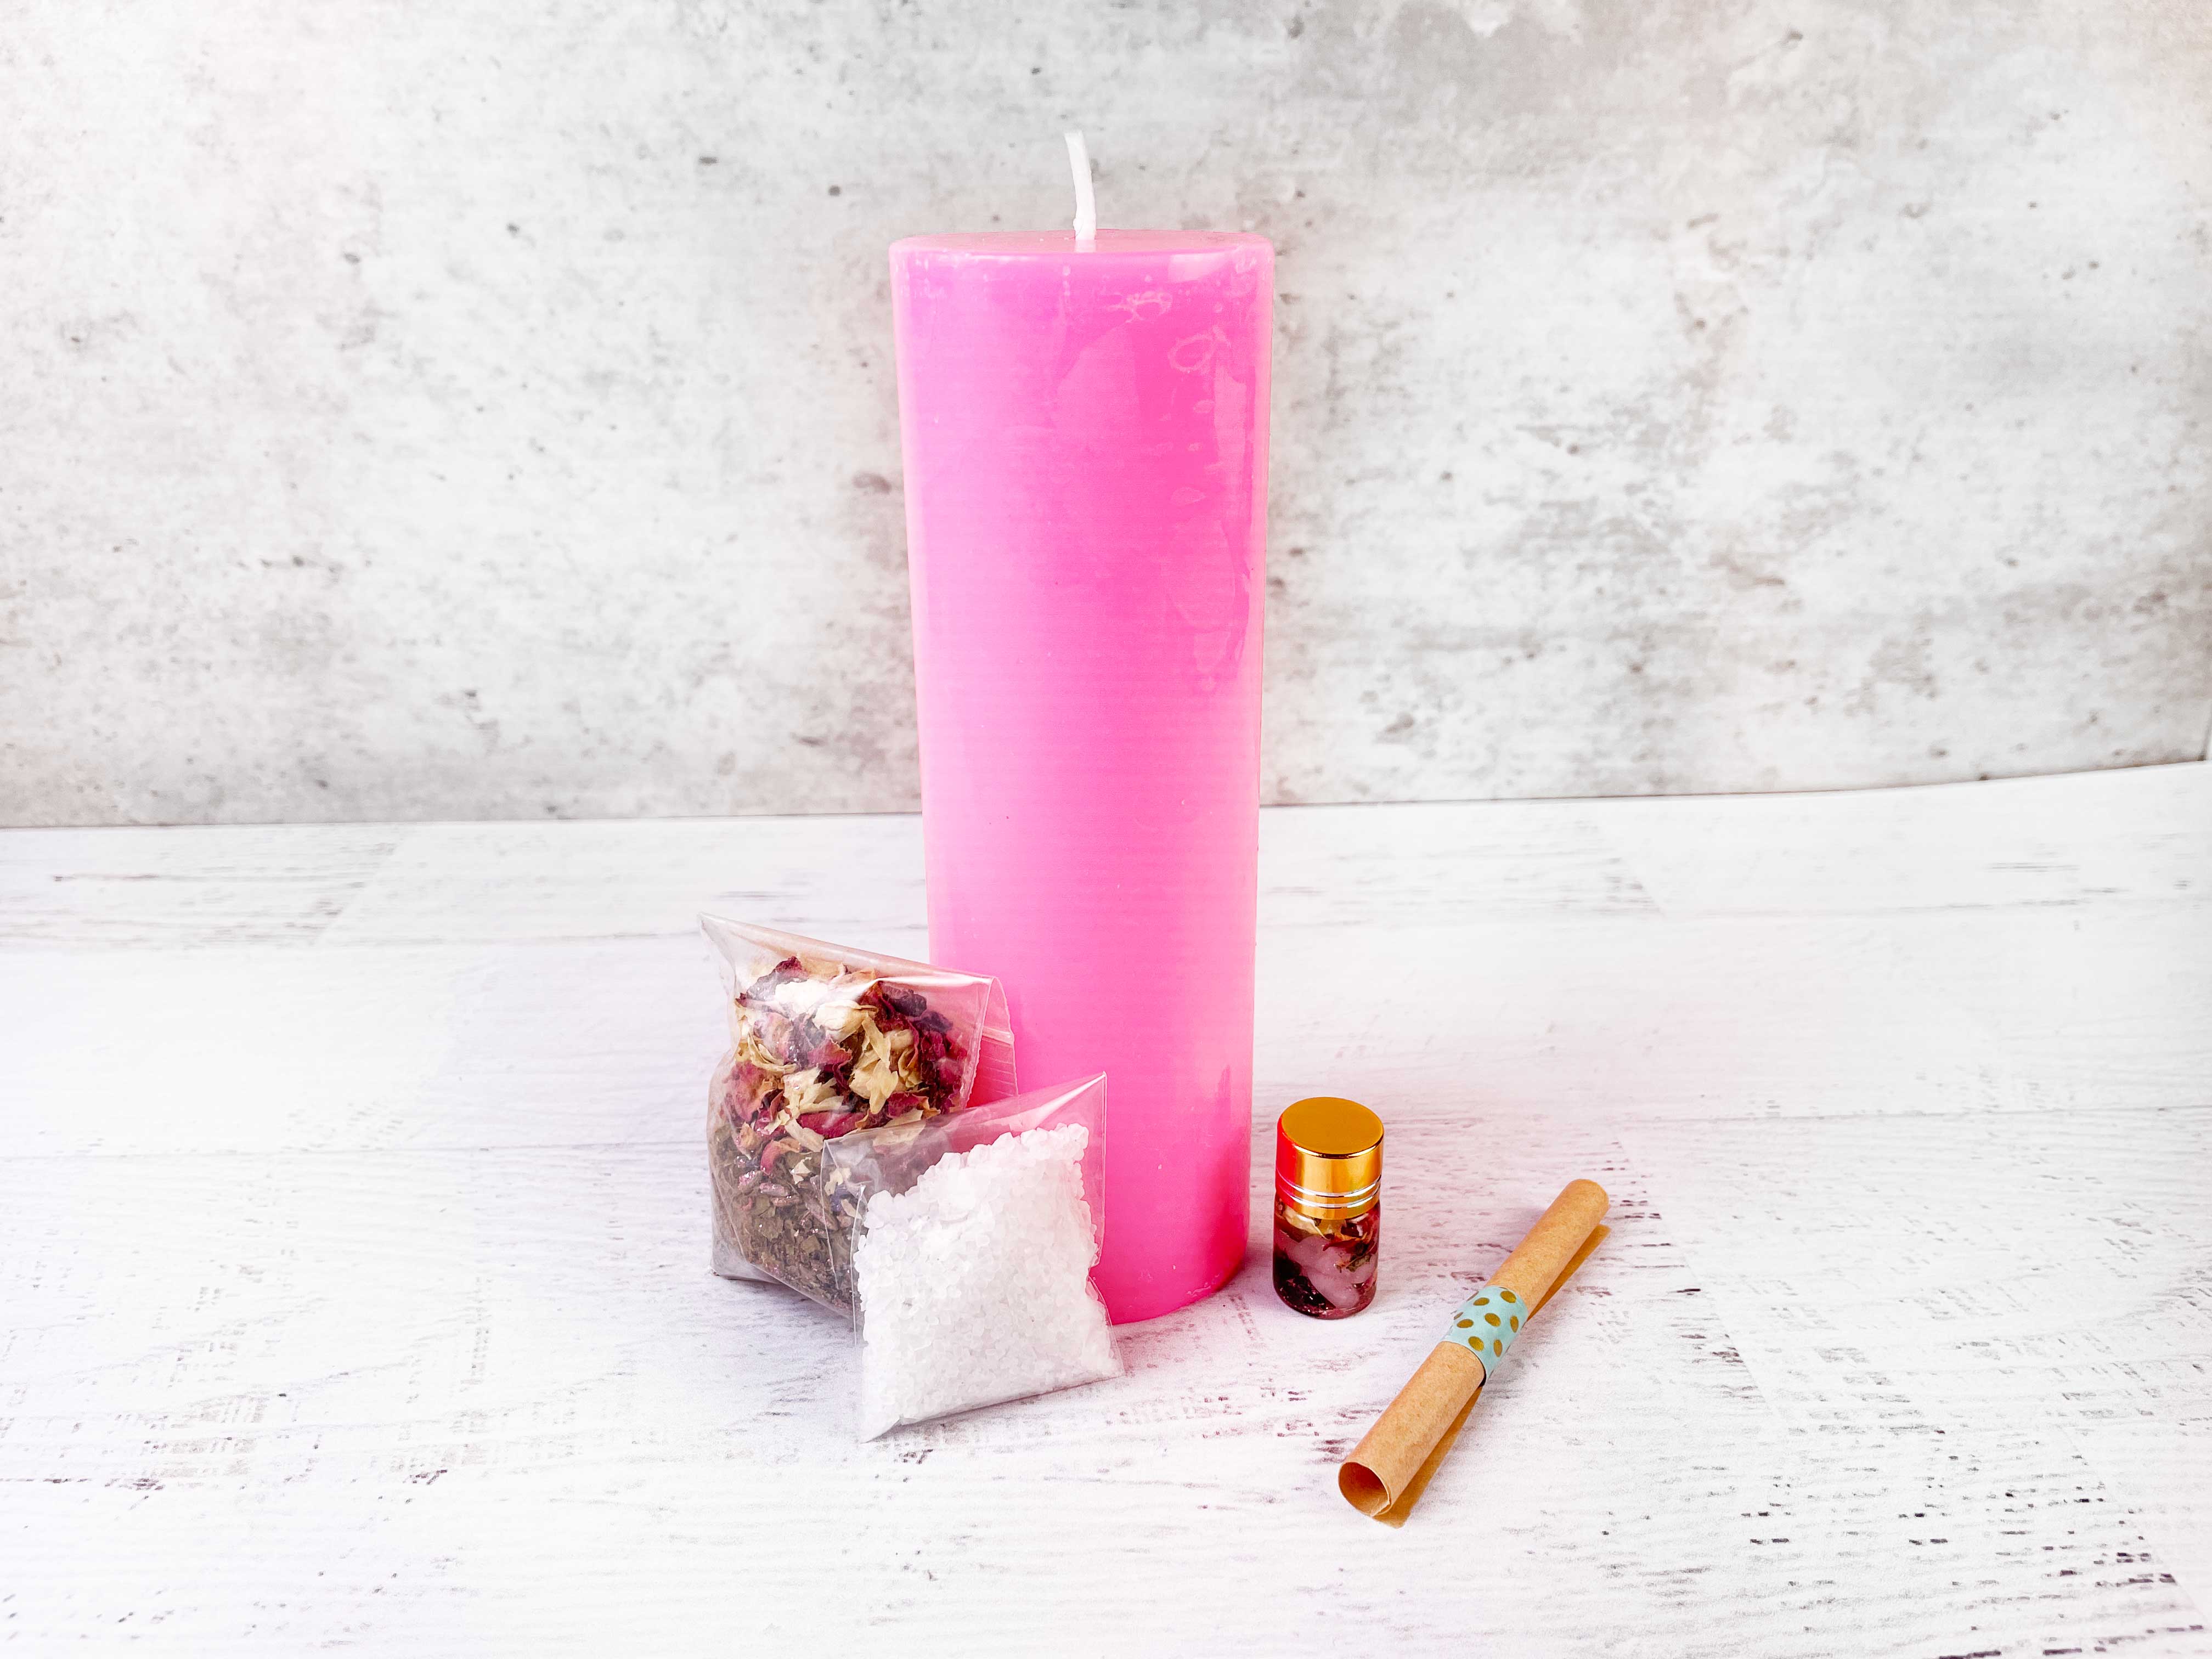 Buy Online Latest and Unique Love, Romance, Self-Love Candle Ritual Kit | Shop Best Spiritual Items - The Mystical Ritual